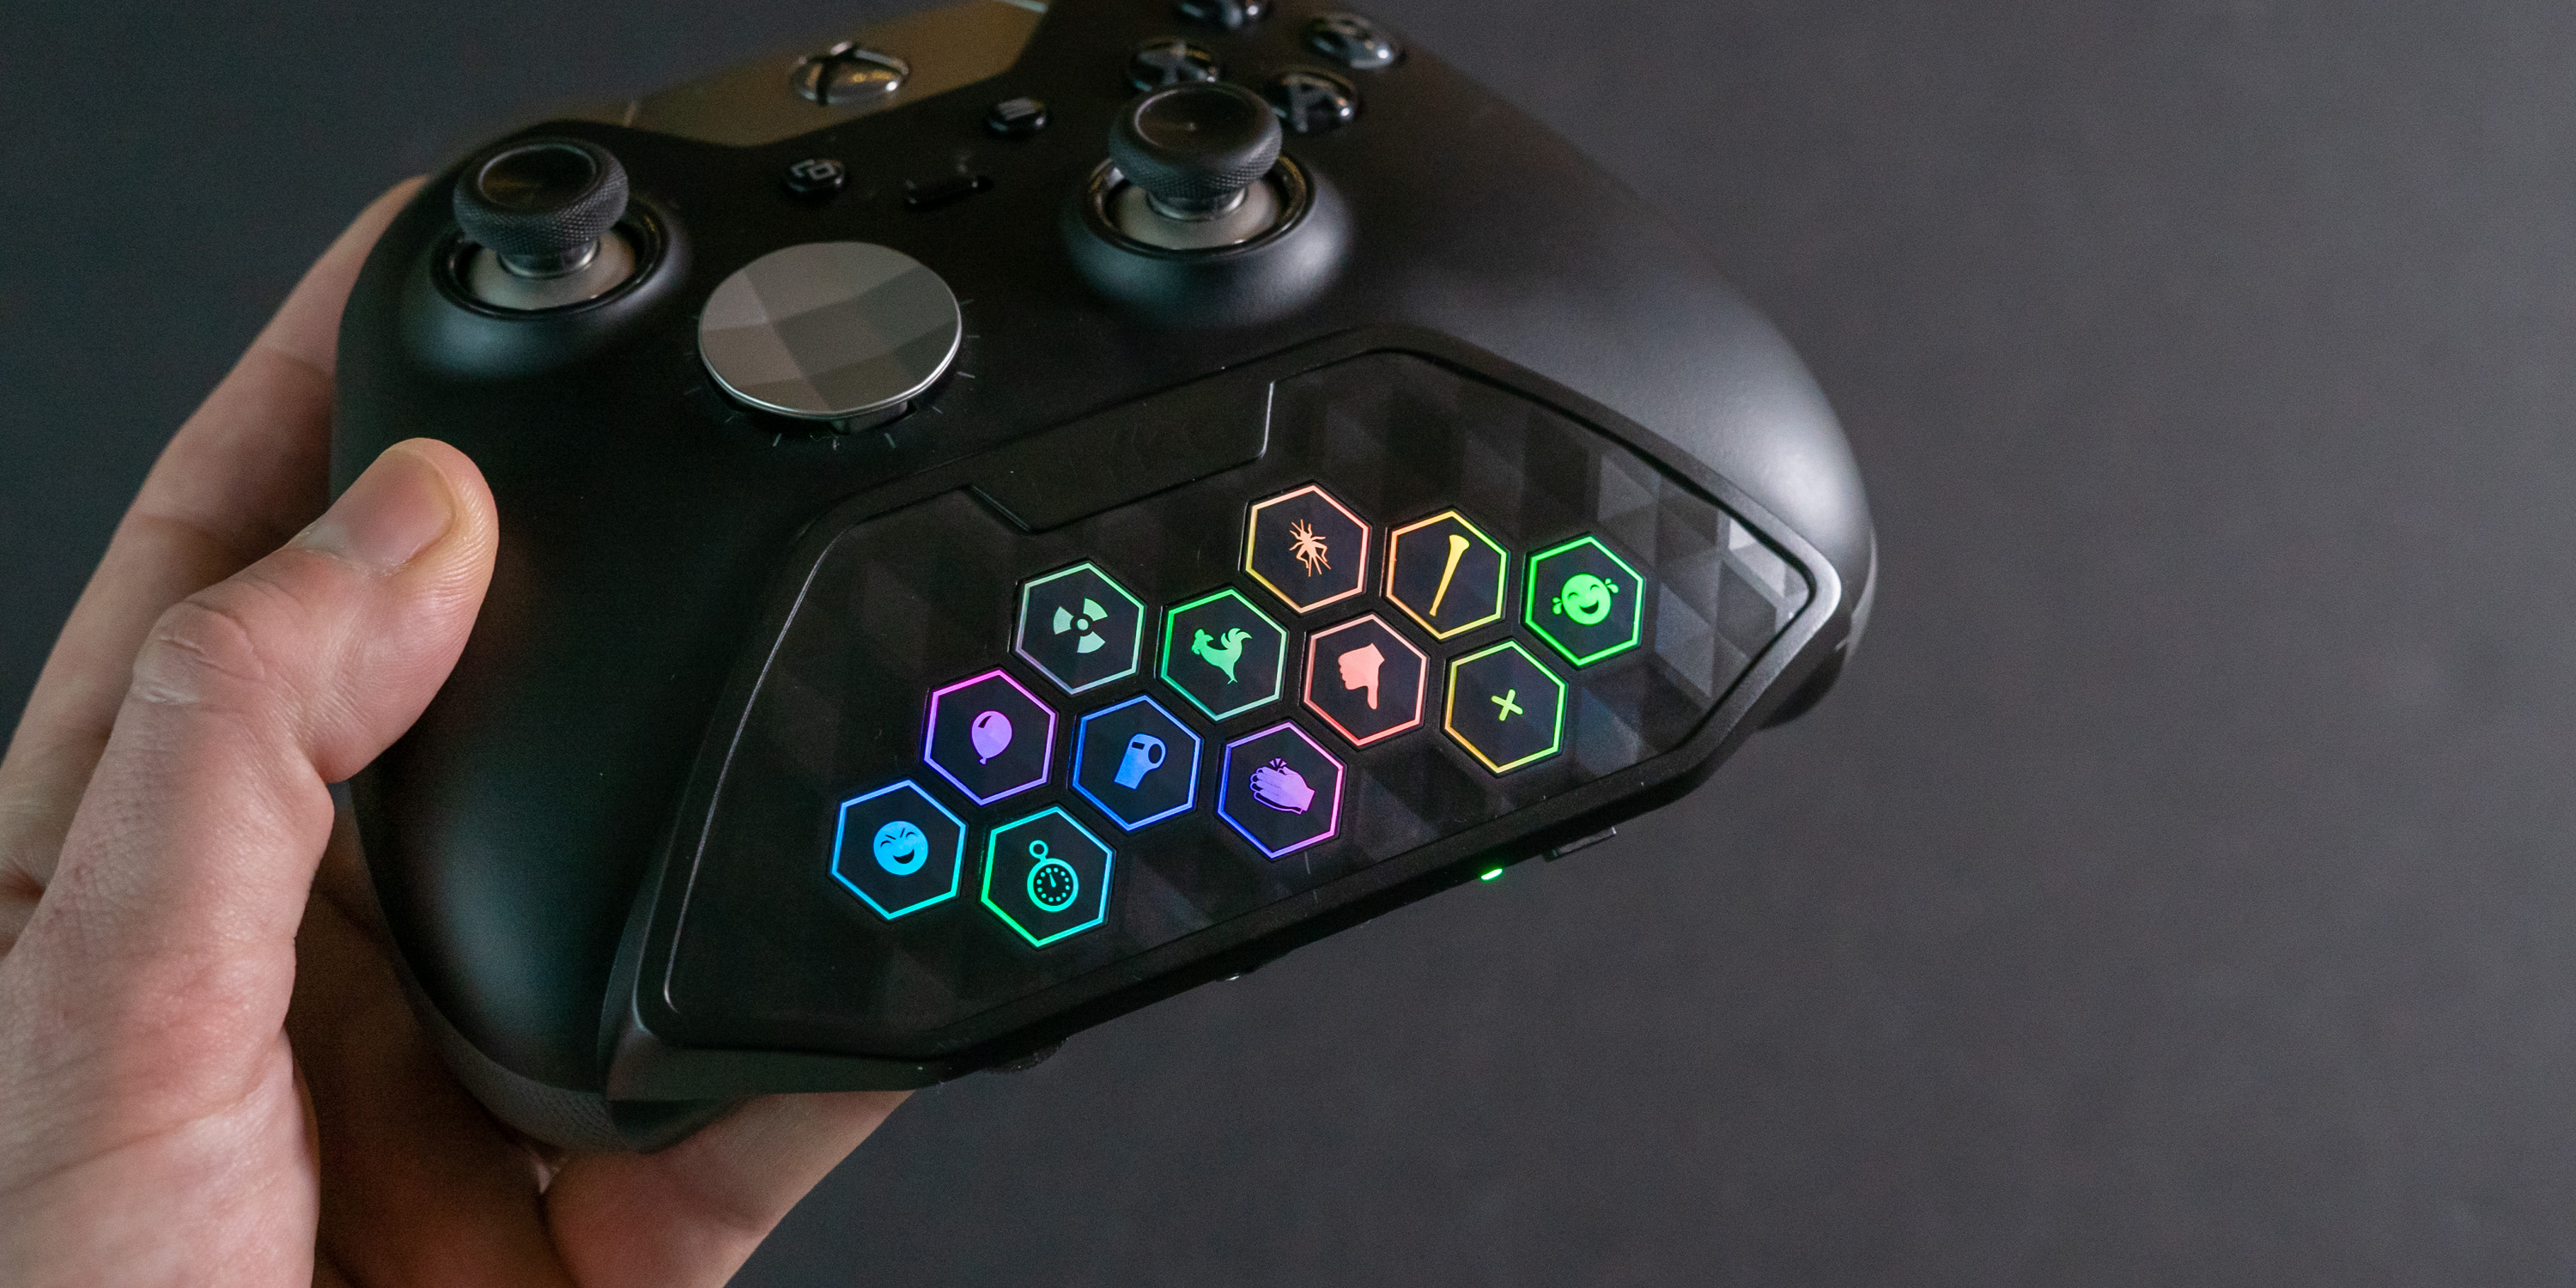 Nyko Sound Pad Review: Add a sound board to your Xbox One or PS4